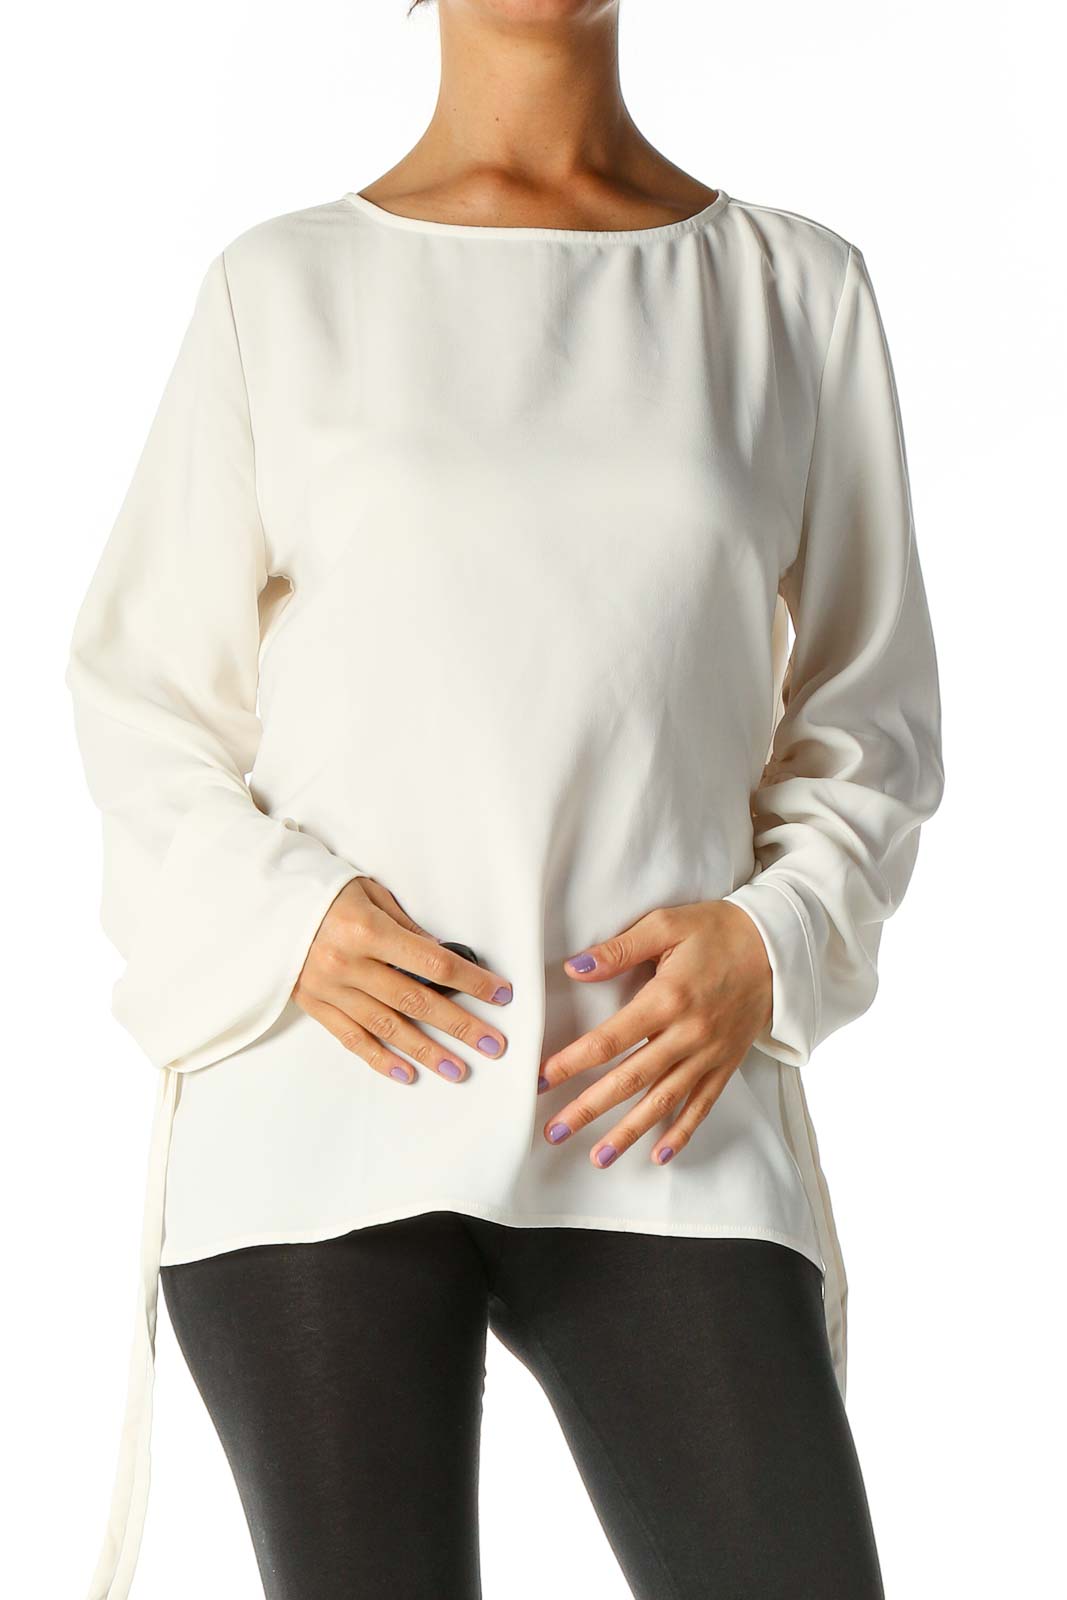 White Solid Blouse Front